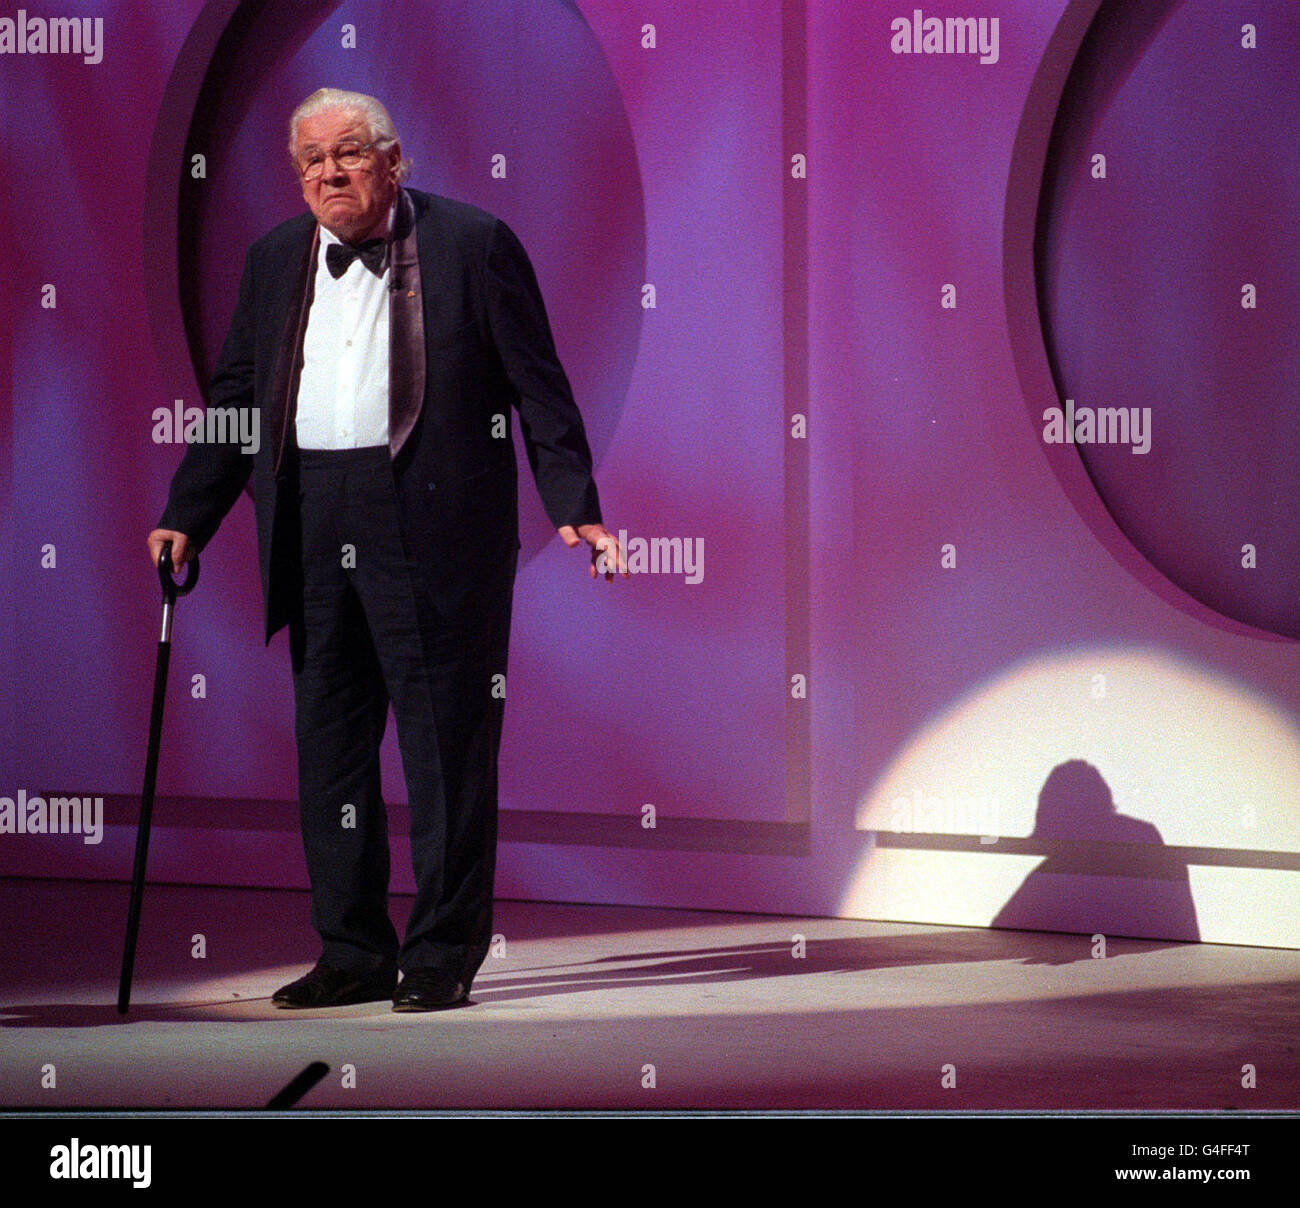 PA NEWS PHOTO 28/10/98 ACTOR PETER USTINOV ON STAGE AT THE PRINCE'S TRUST COMEDY GALA AT THE LYCEUM THEATRE IN LONDON. THE EVENT WAS TO MARK THE PRINCE OF WALES'S 50TH BIRTHDAY (14/11/98). Stock Photo